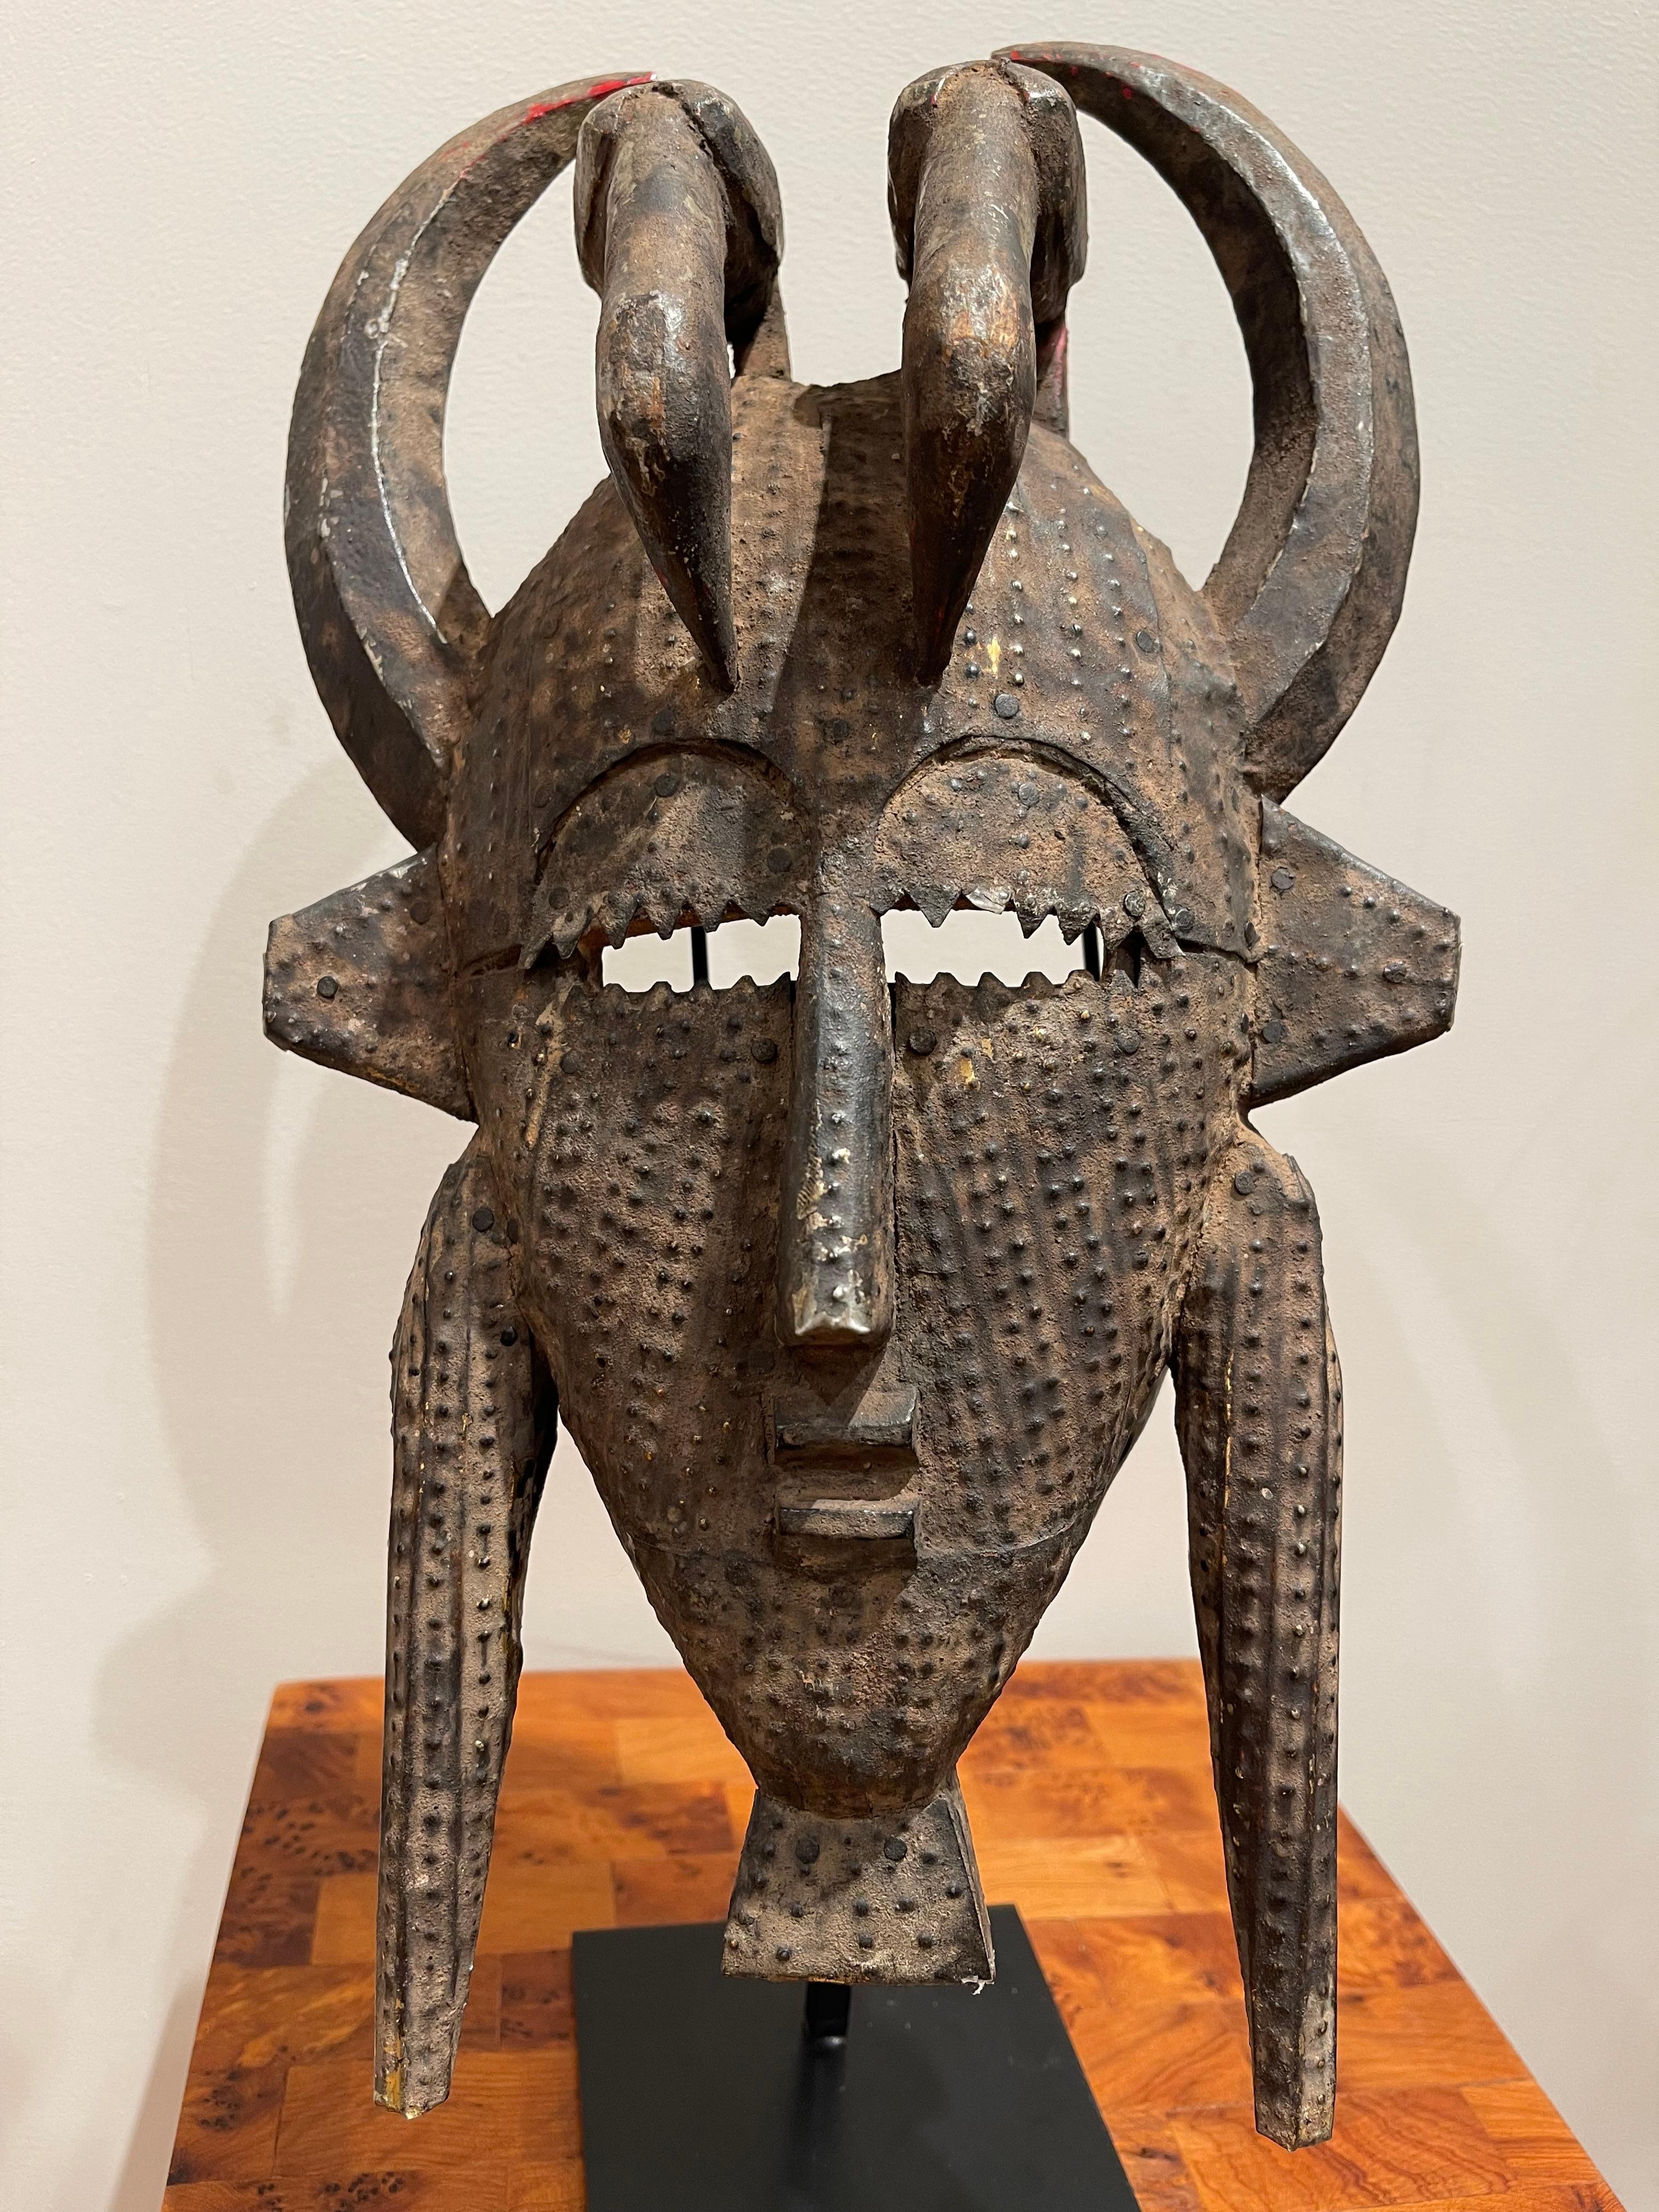 Splendid Kpélié Mask, Sénoufo population, Ivory Coast 1950
Kpélié Mask, wood covered with copper 
Dimensions 36.5 x 14.5 cm / 14.17 x 5.51 inches

The populations speaking the Sénoufo language are spread across a vast territory ranging from southern